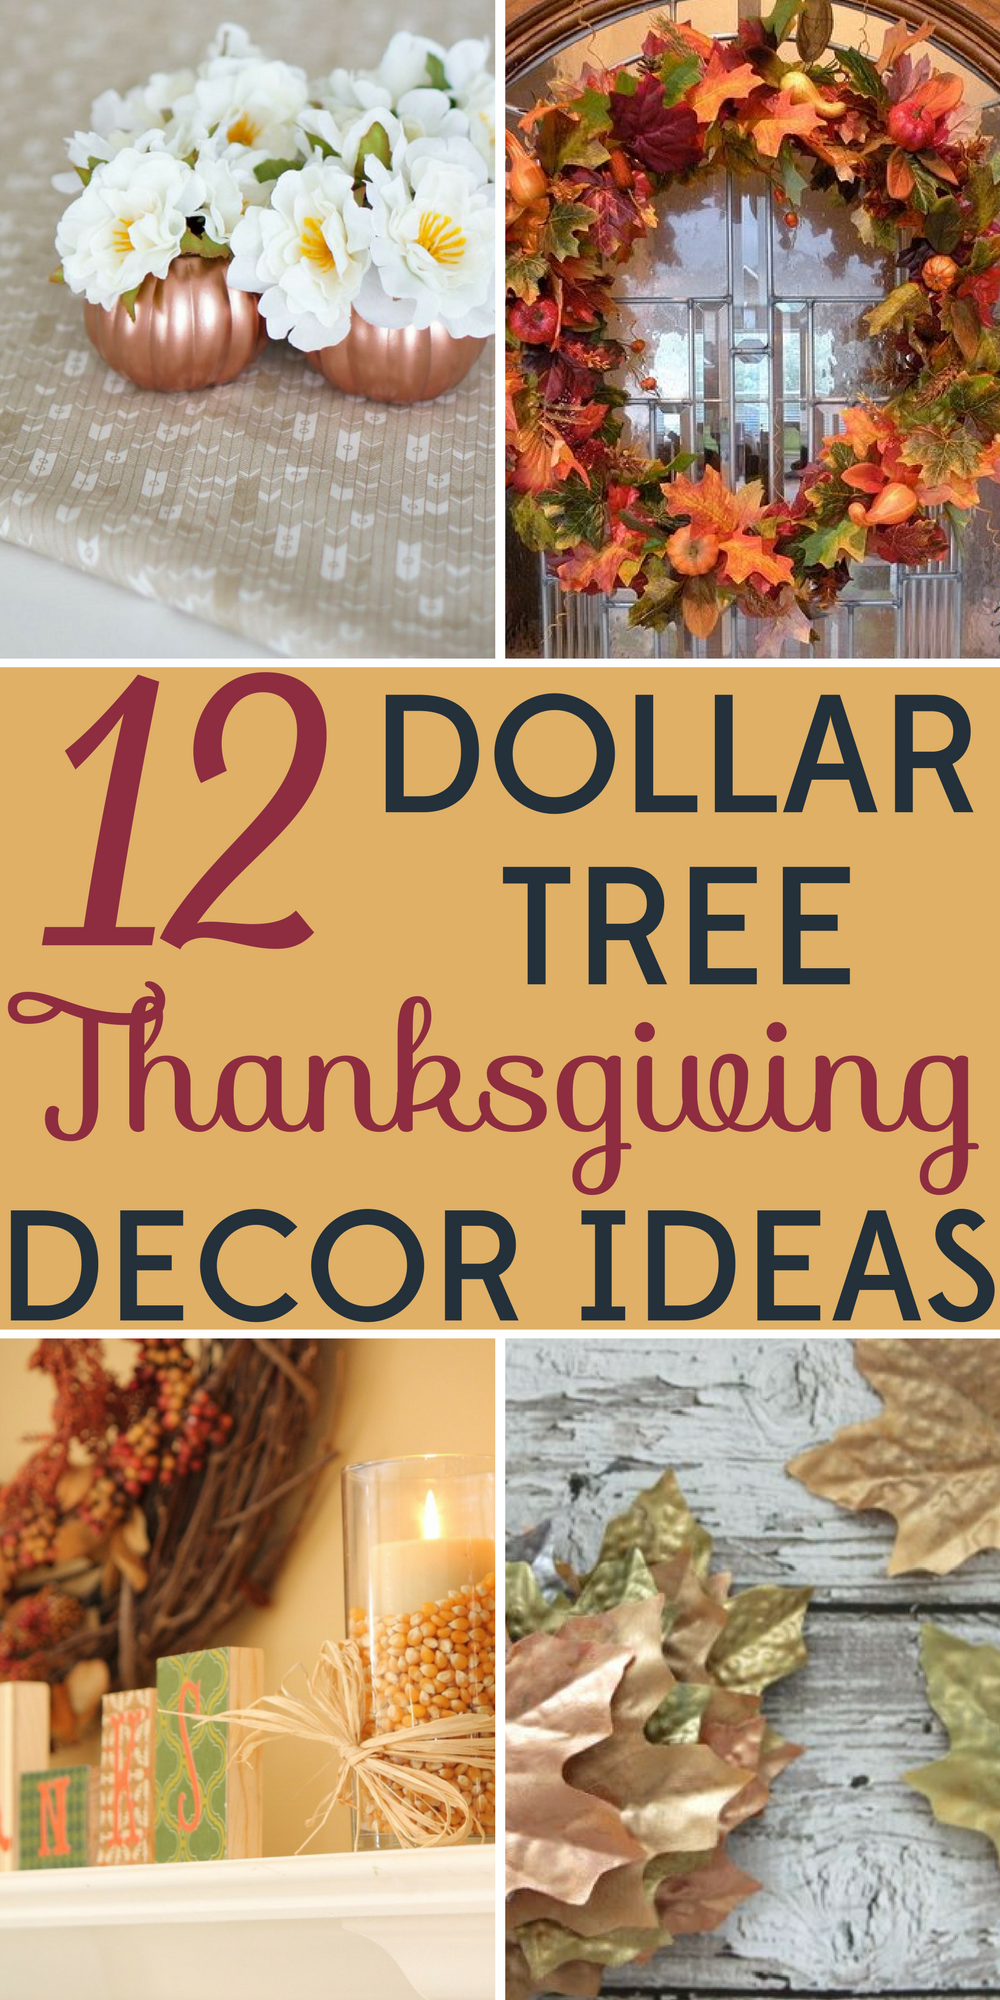 Decorating on a Budget: 12 Dollar Tree Thanksgiving Decor Ideas -   18 thanksgiving decorations for home dollar stores ideas